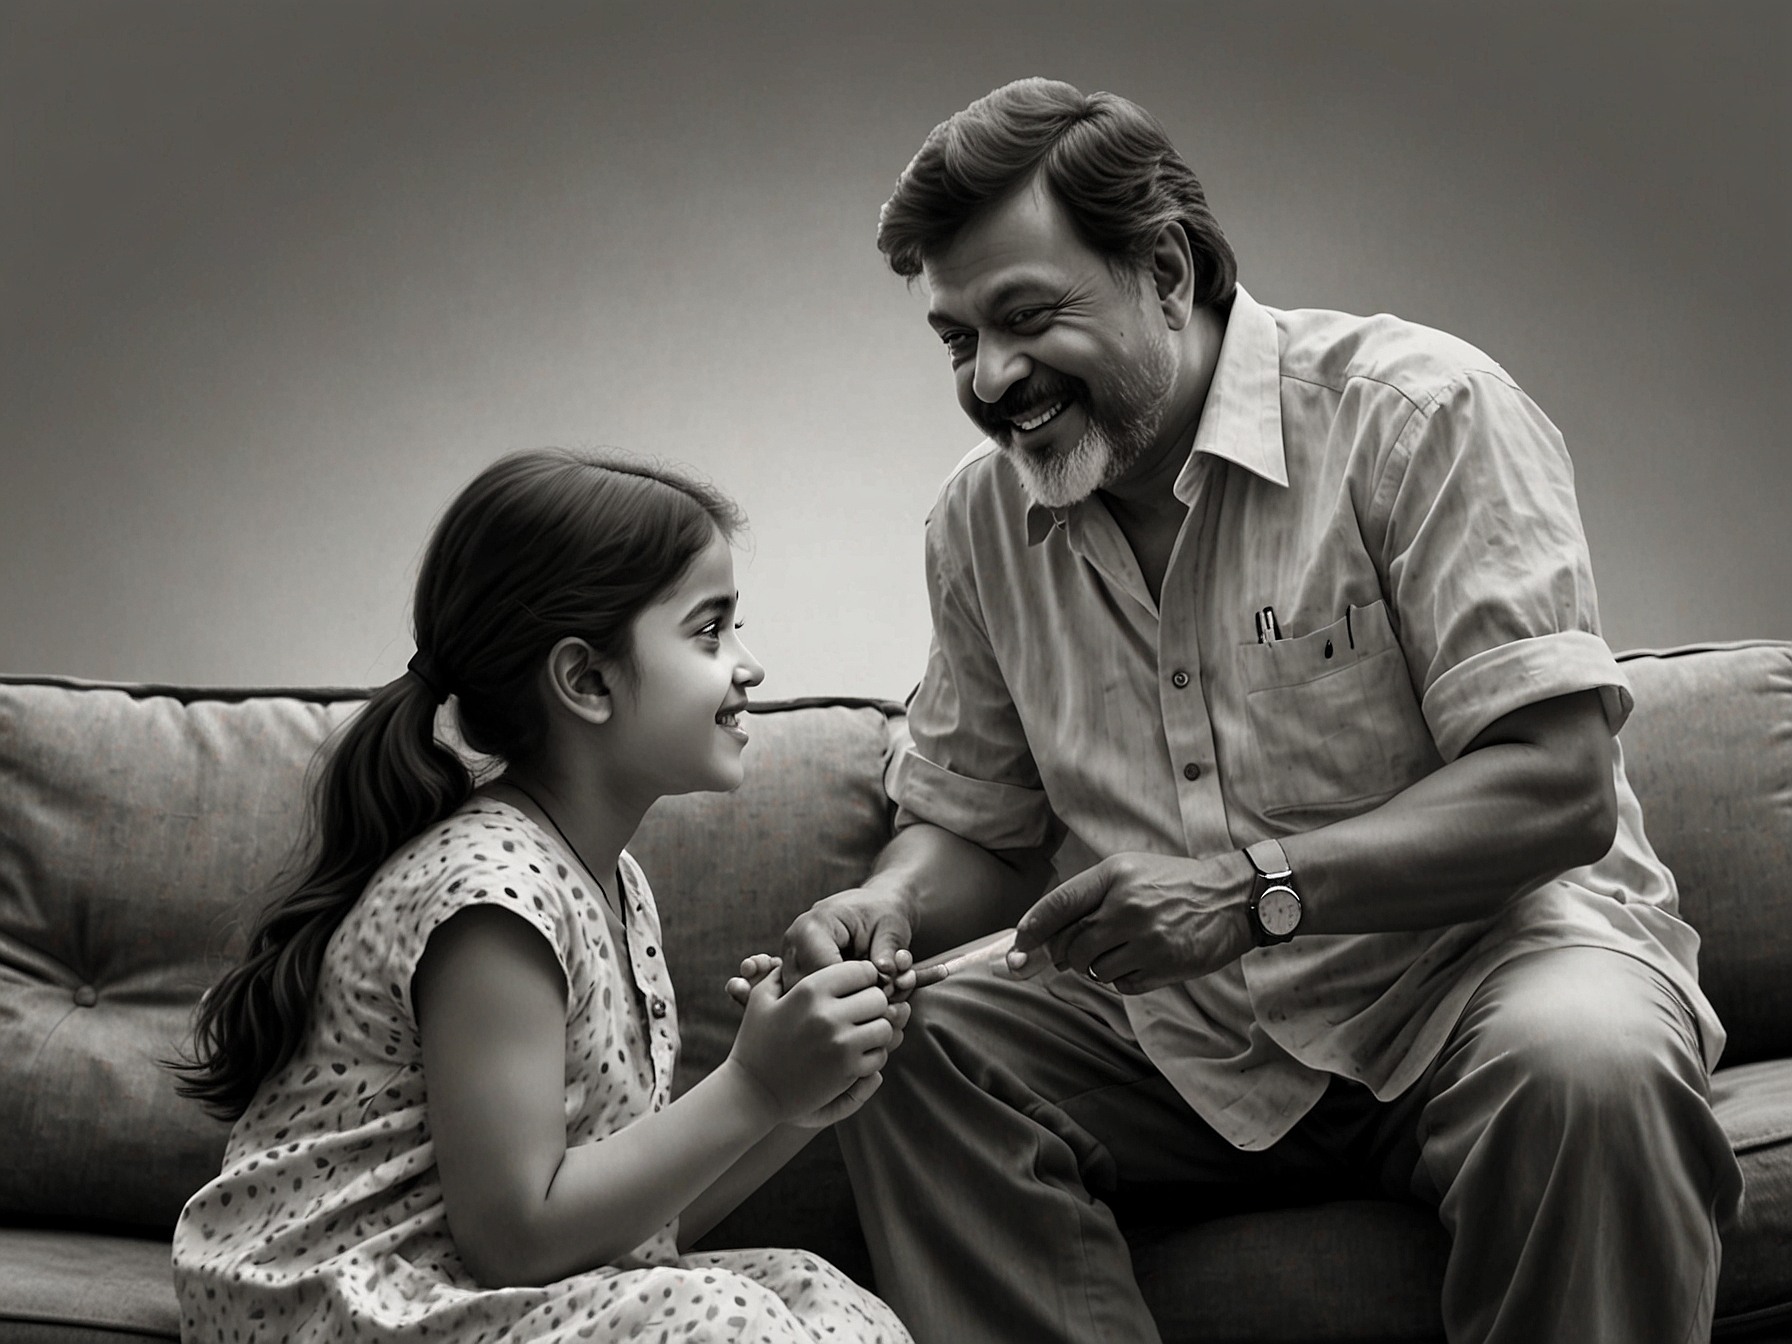 Klin Kaara playing with her grandfather, veteran actor Chiranjeevi, capturing a cherished multigenerational family moment that enriches her childhood.